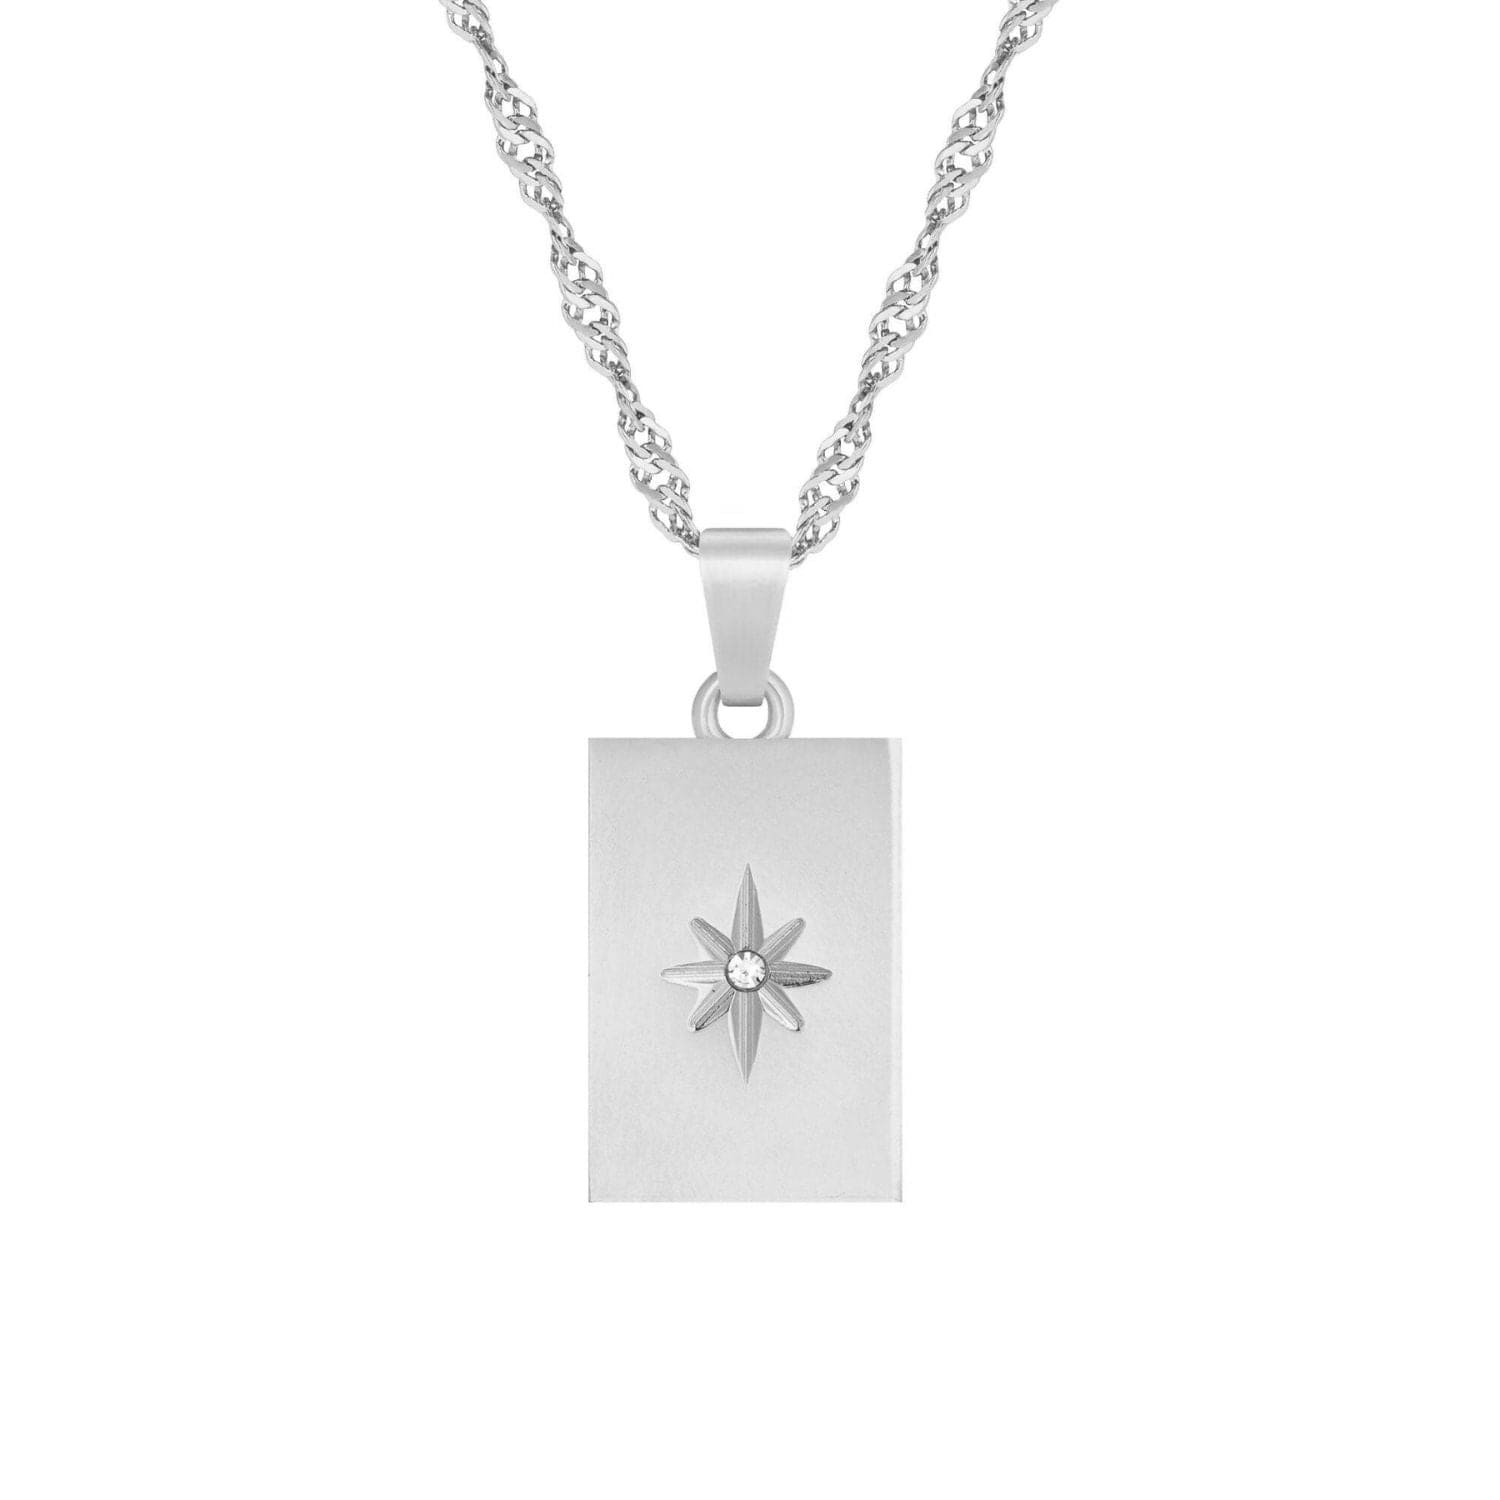 BohoMoon Stainless Steel Kaylee Star Necklace Silver